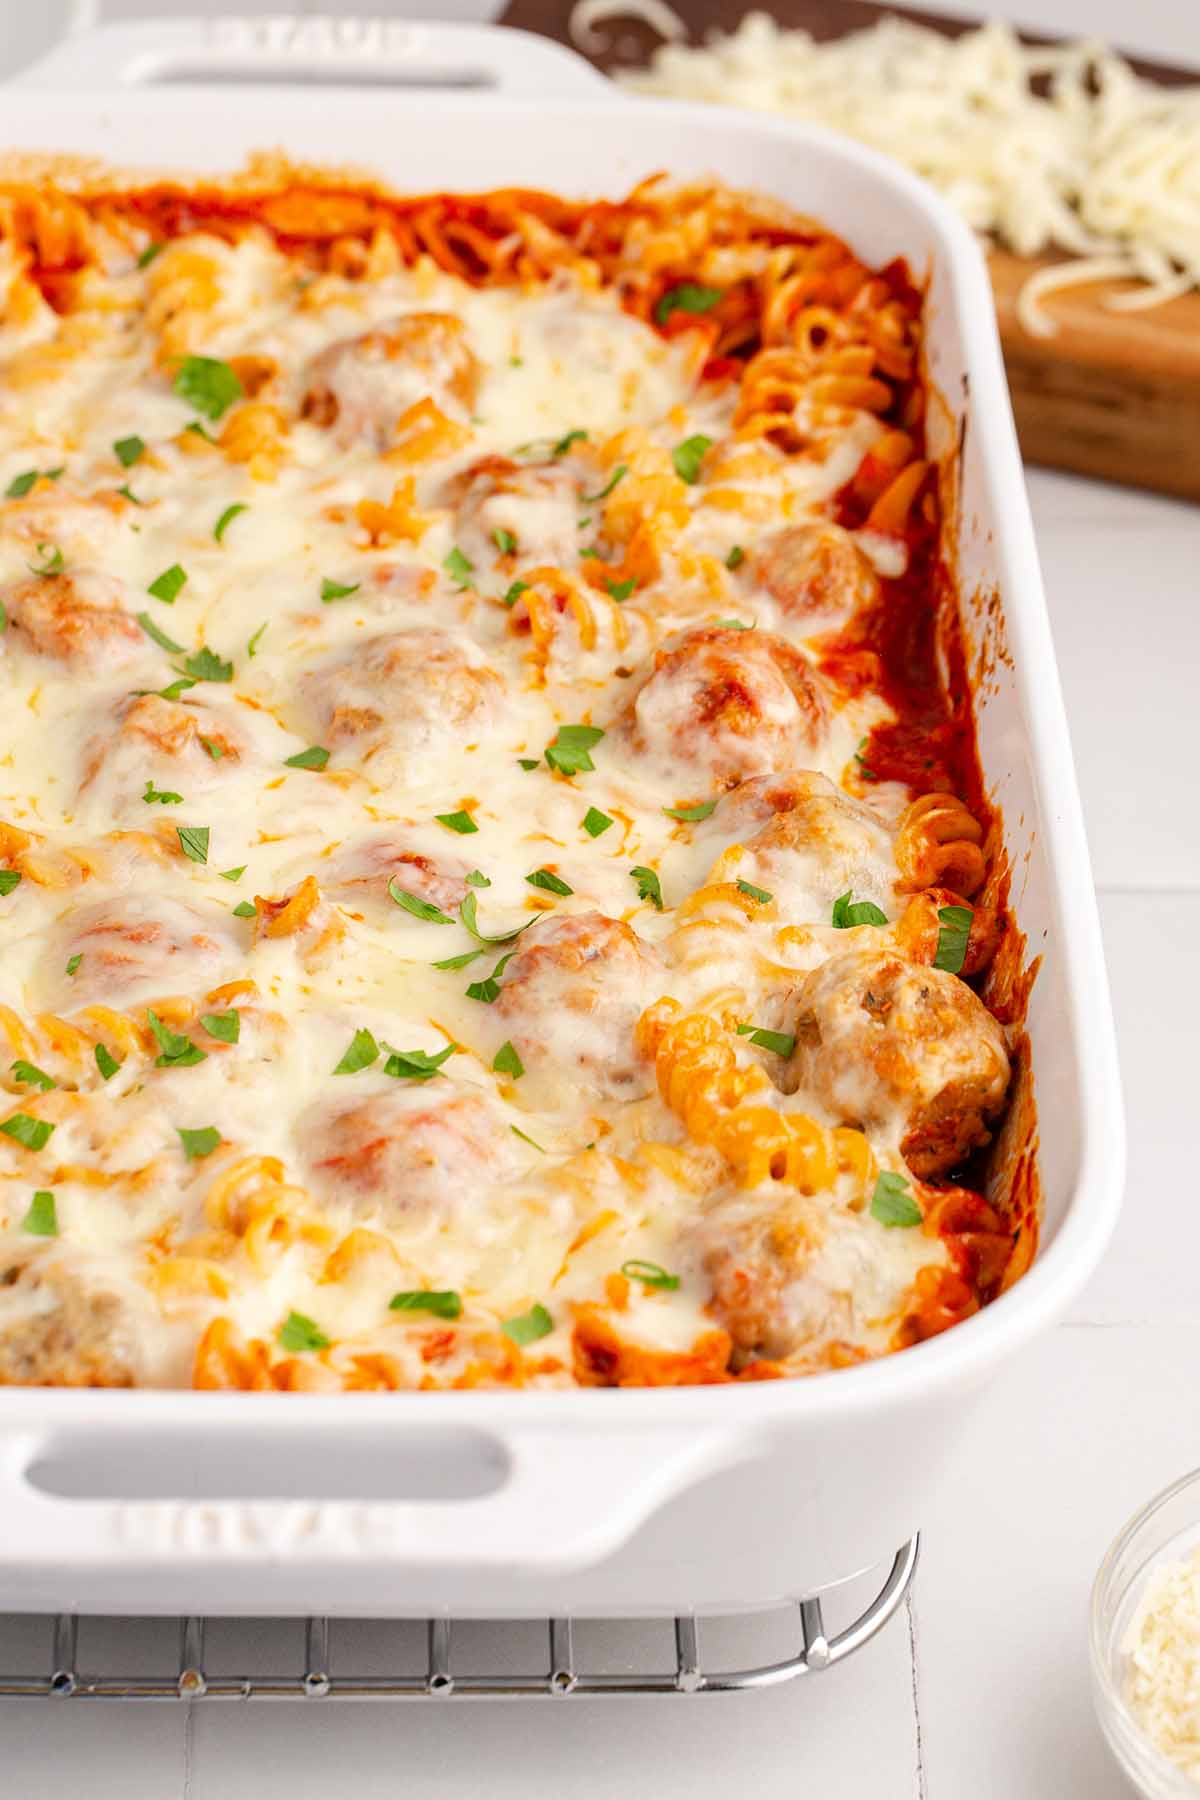 Semi-close up of baked meatball casserole in a large white baking dish.